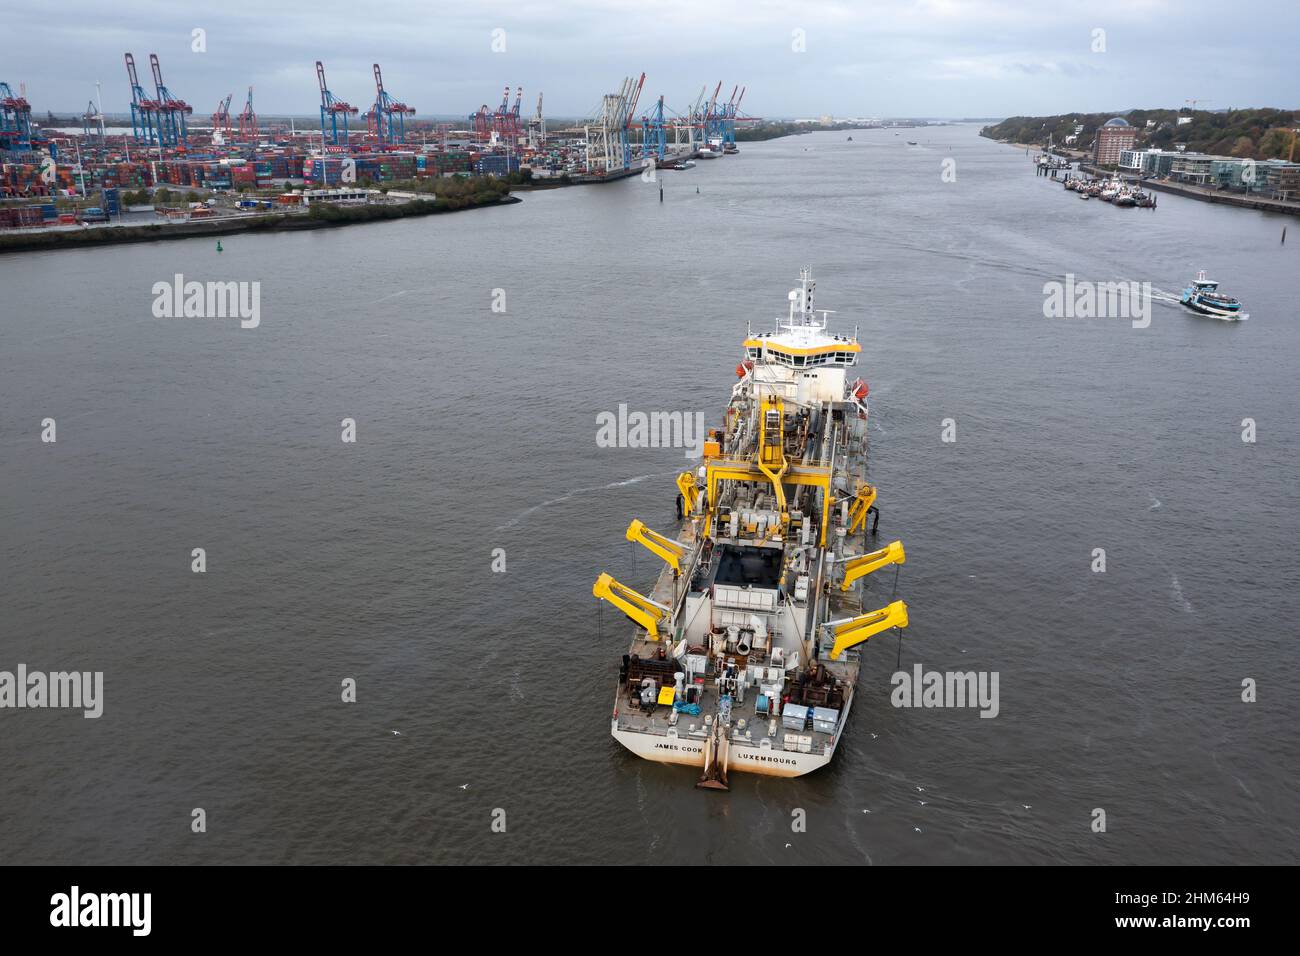 Trailing suction hopper dregder James Cook in the port of Hamburg. Sediments deposited on the bottom of the Elbe riverbed need to be removed regularly Stock Photo